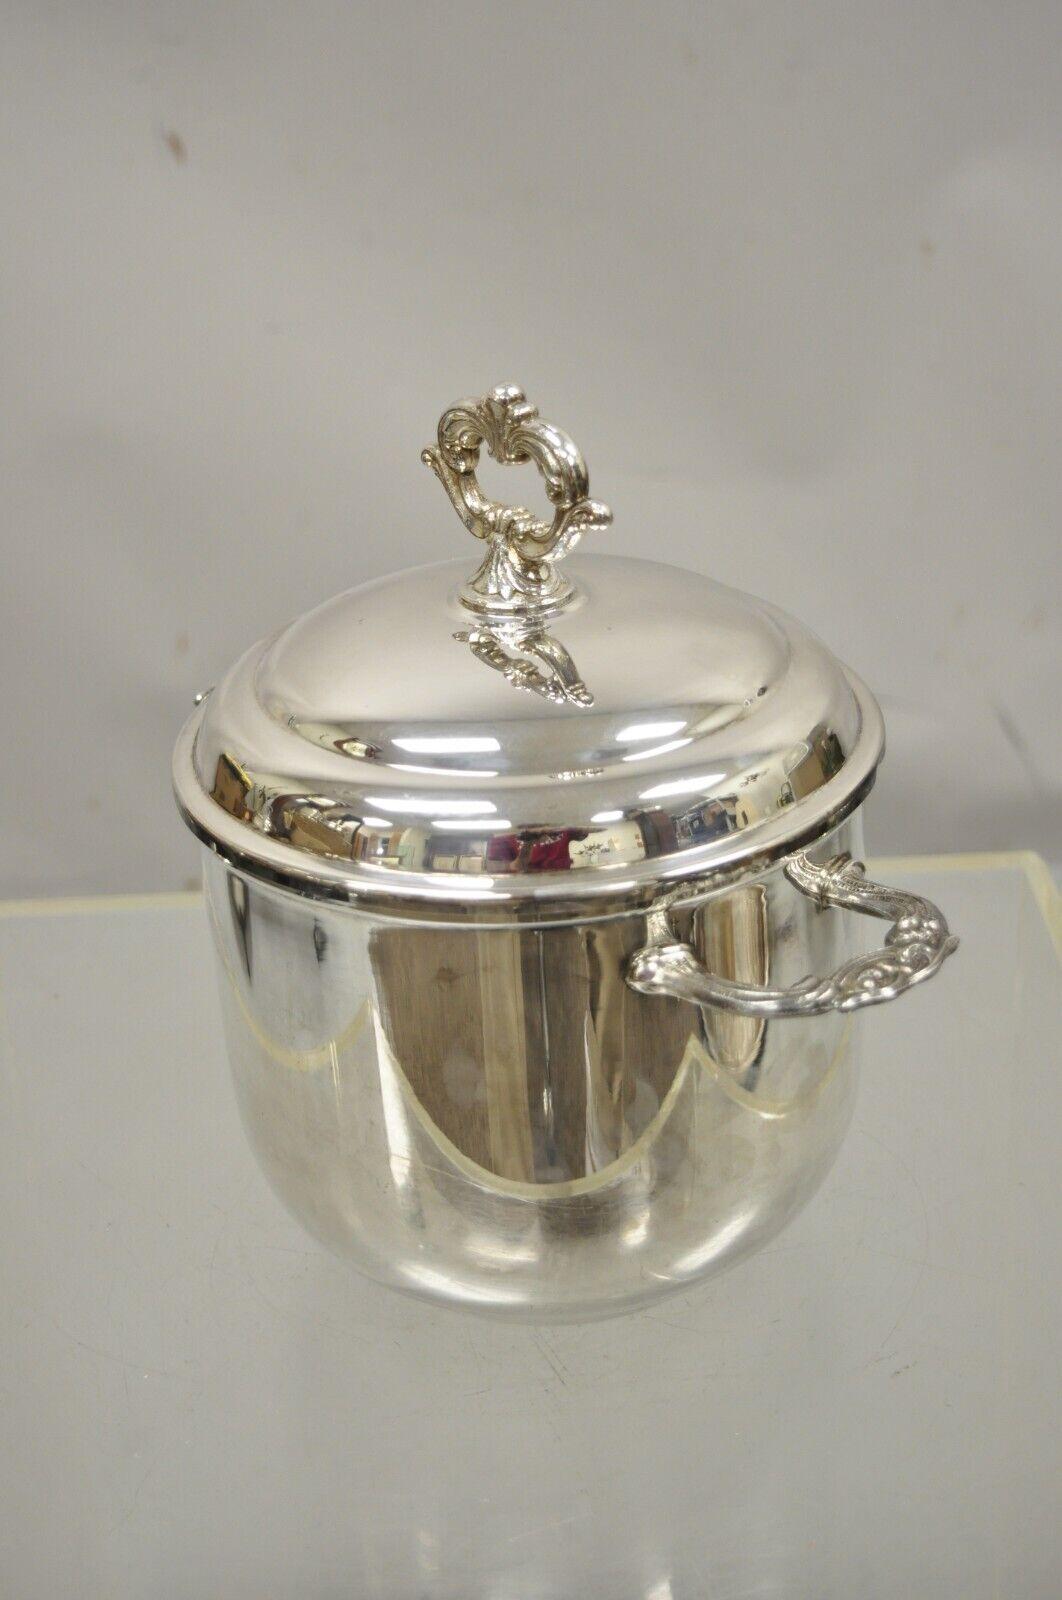 Vintage Leonard silver plate lidded ice bucket regency style insulated. Item features an insulated Interior, ornate twin handles, original stamp, very nice vintage item. Circa mid-20th century. Circa 10